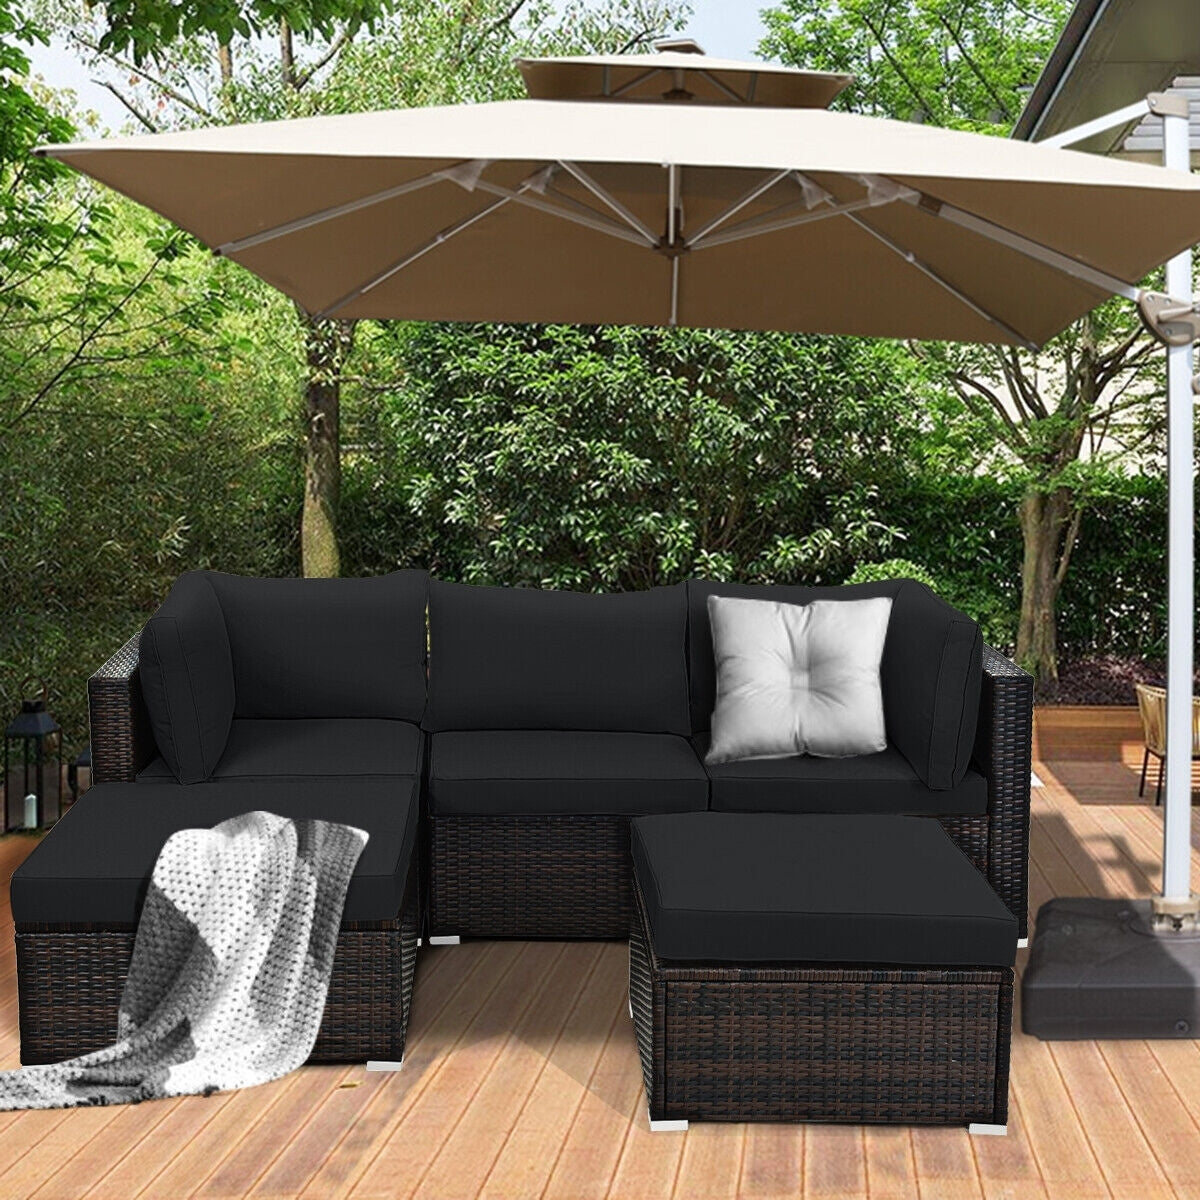 5 Pieces Patio Sectional Rattan Furniture Set with Ottoman Table-Black